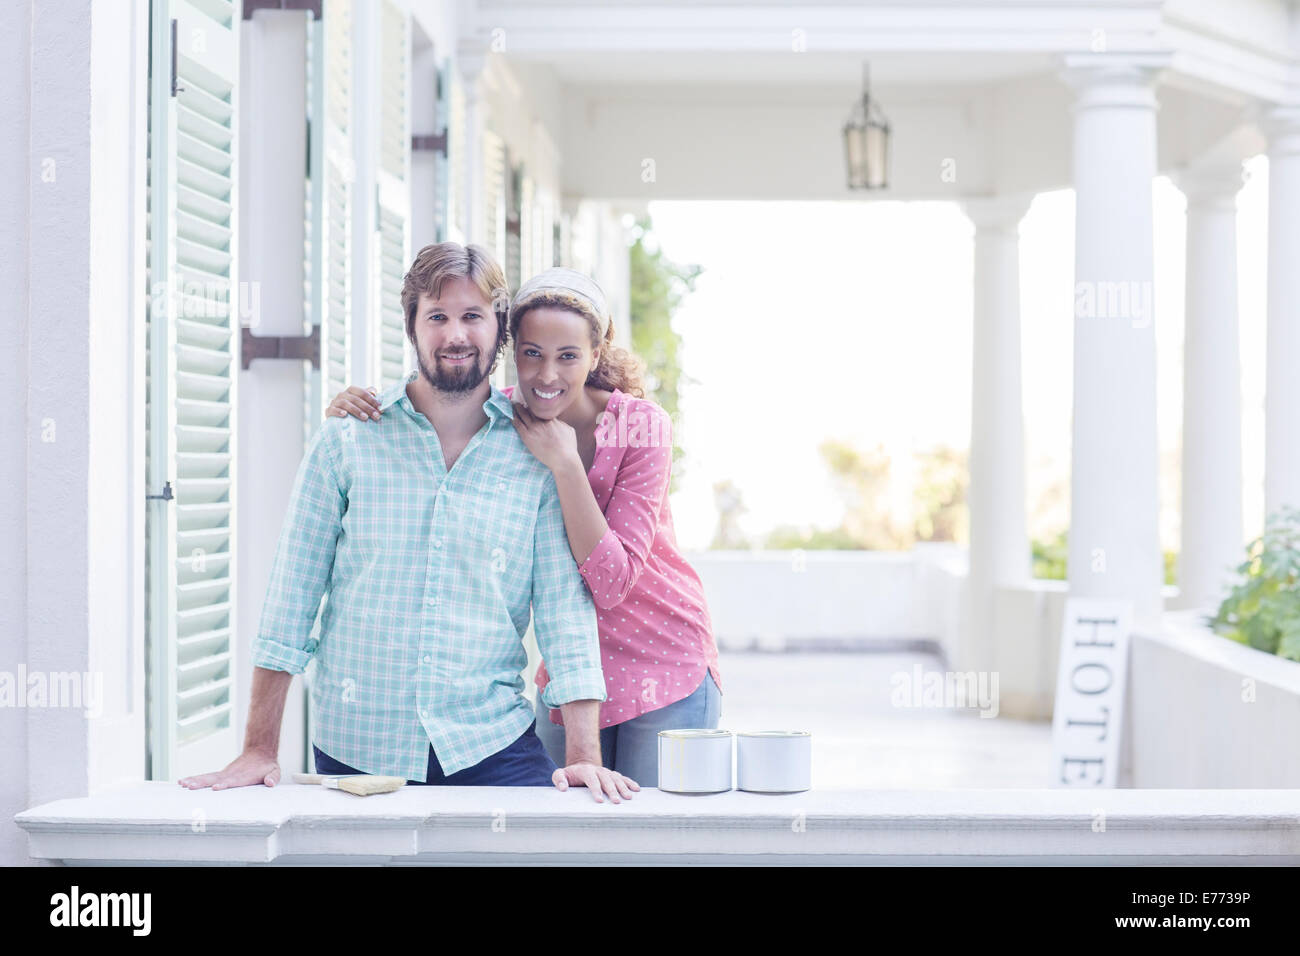 Couple hugging on porch Stock Photo